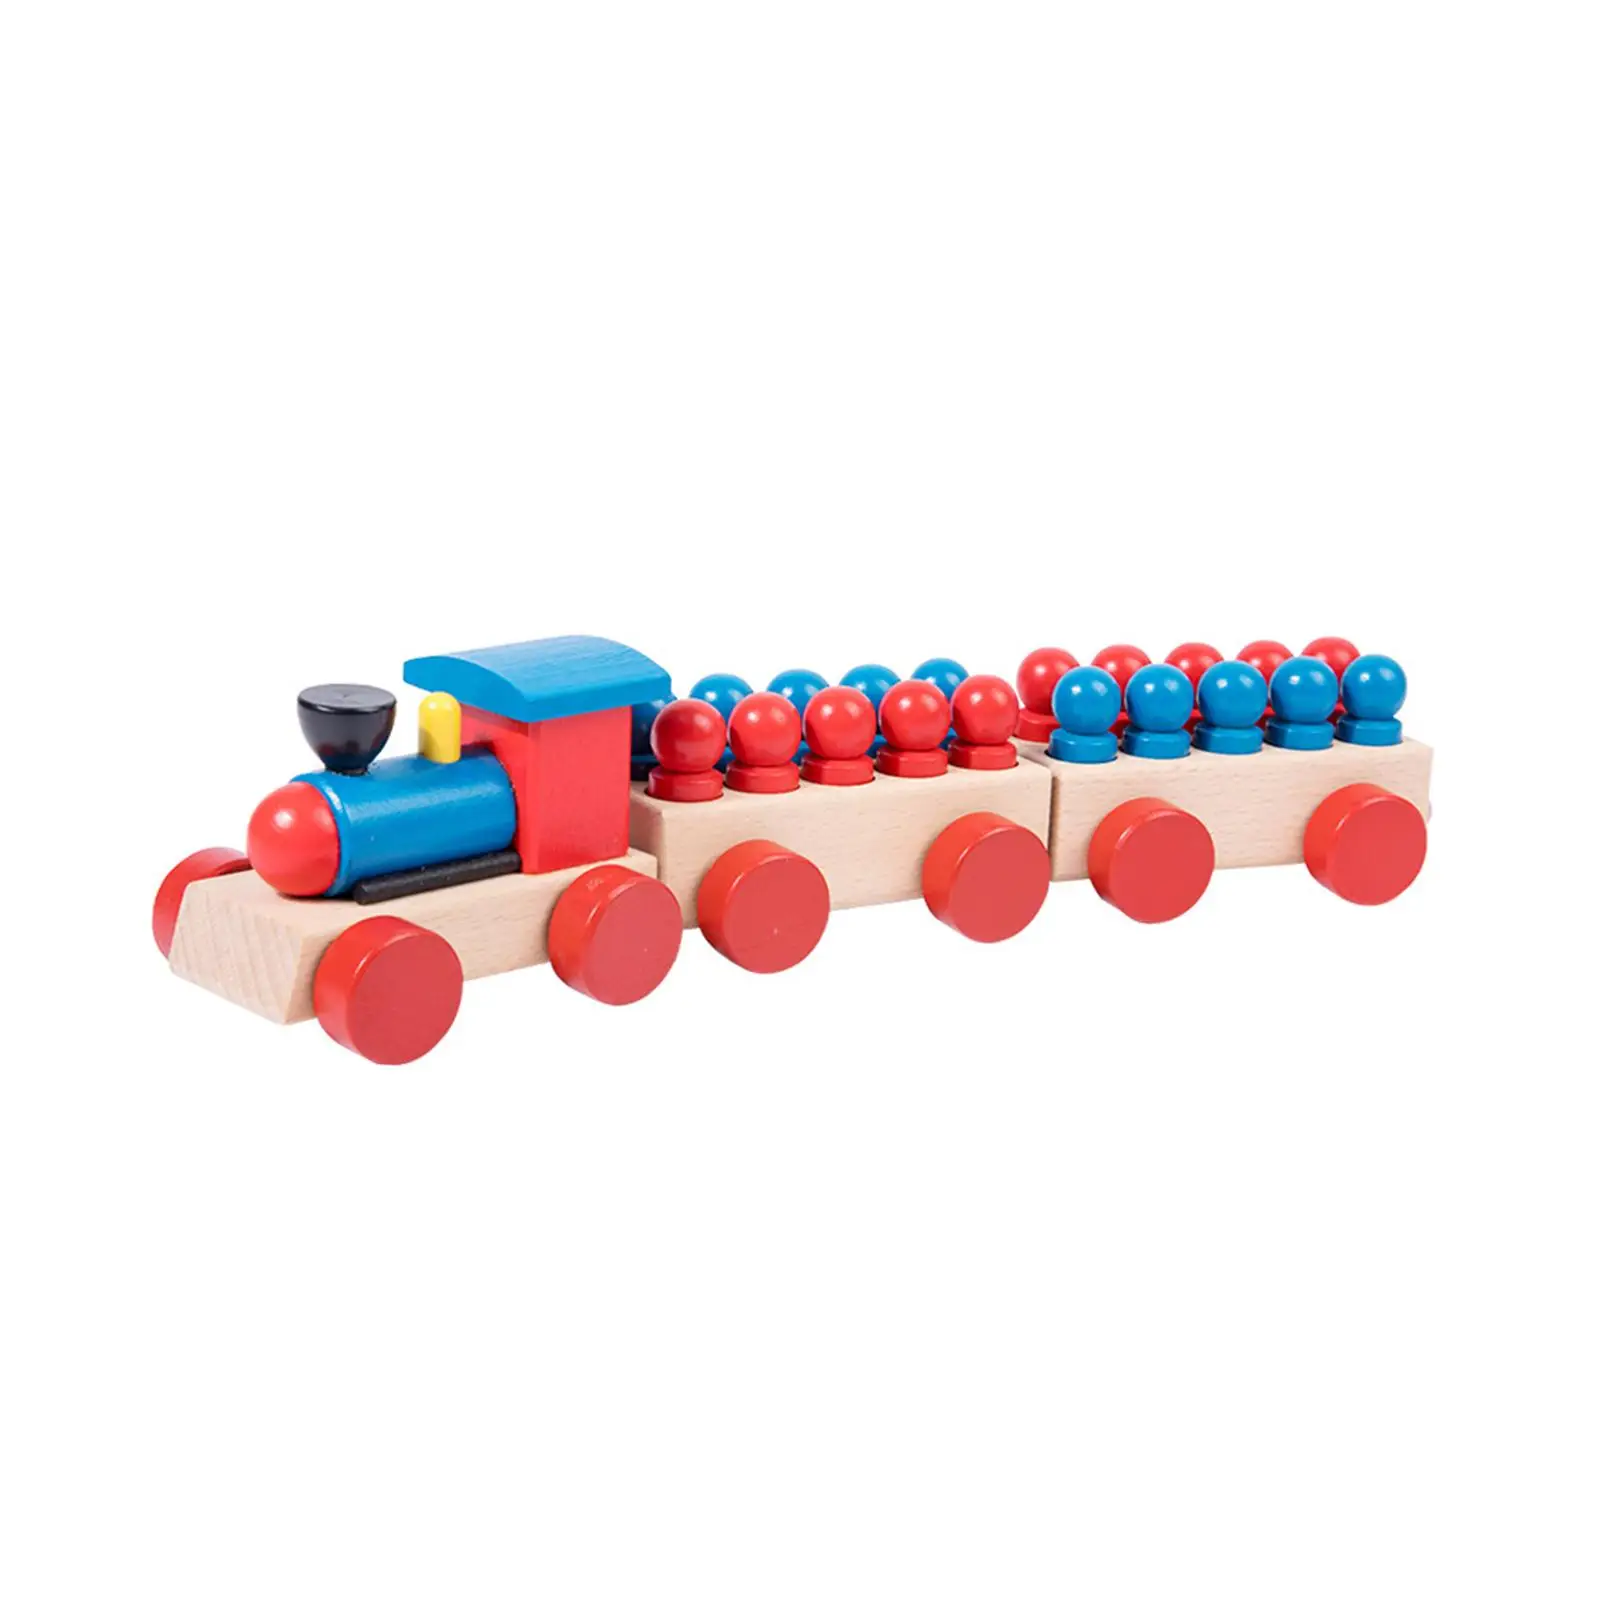 Wooden Train Toddlers Toys Preschool Educational Puzzle Toys Hand Eye Coordination Teaching Aids for Boys Girls 3+ Years Old